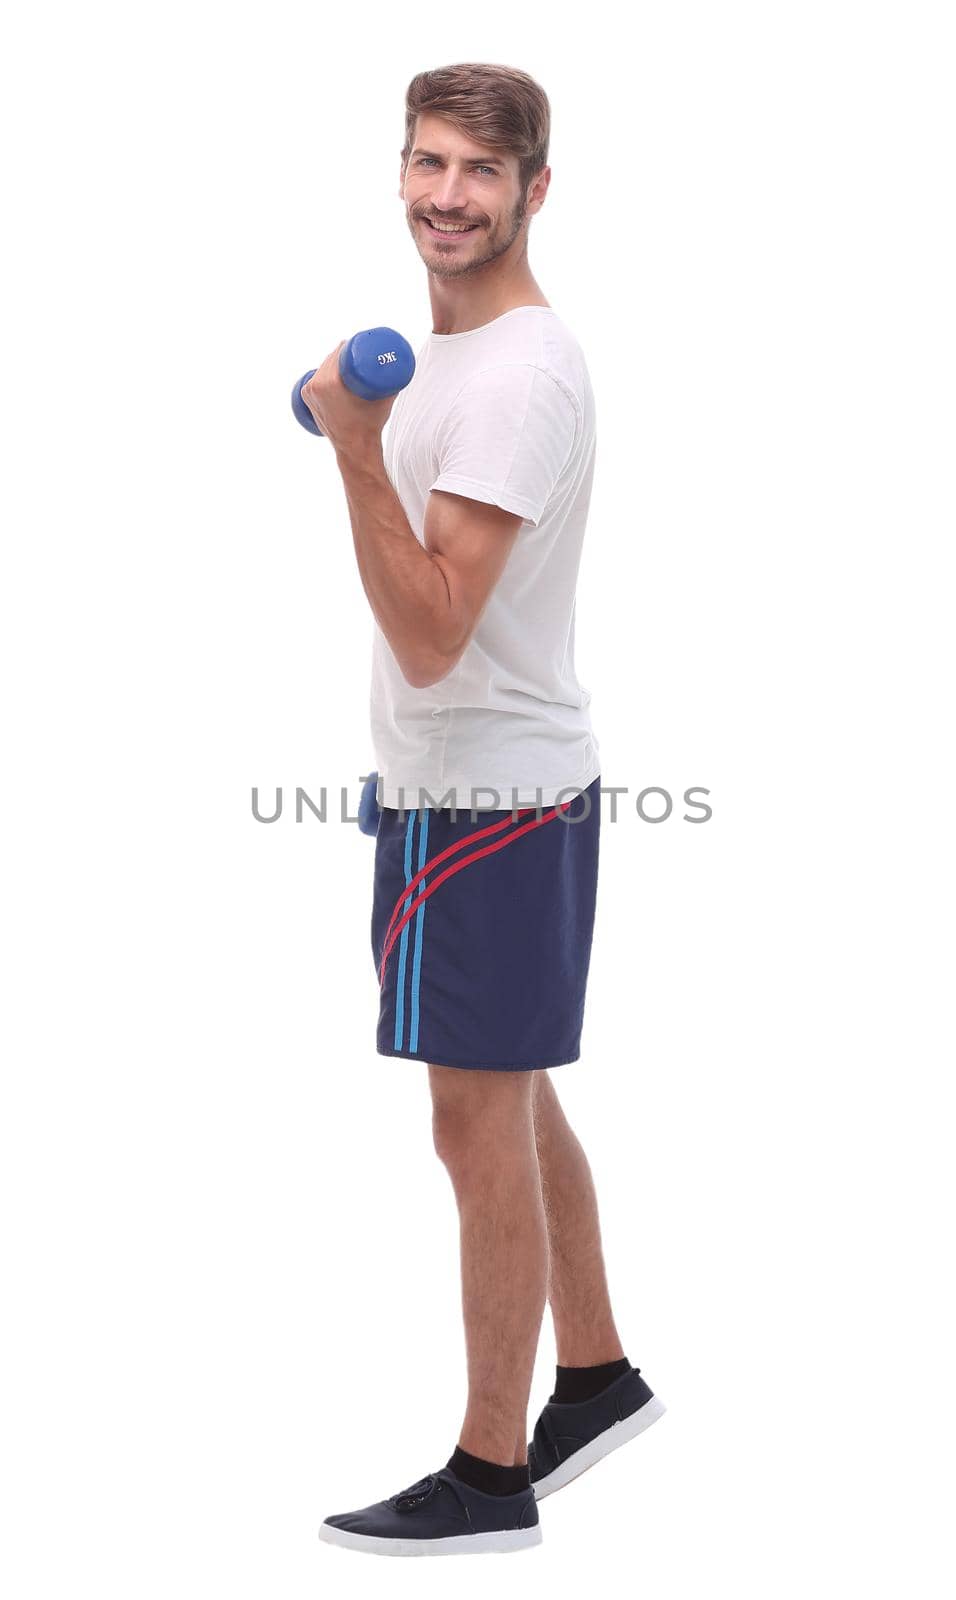 in full growth.young man with dumbbells.isolated on white background